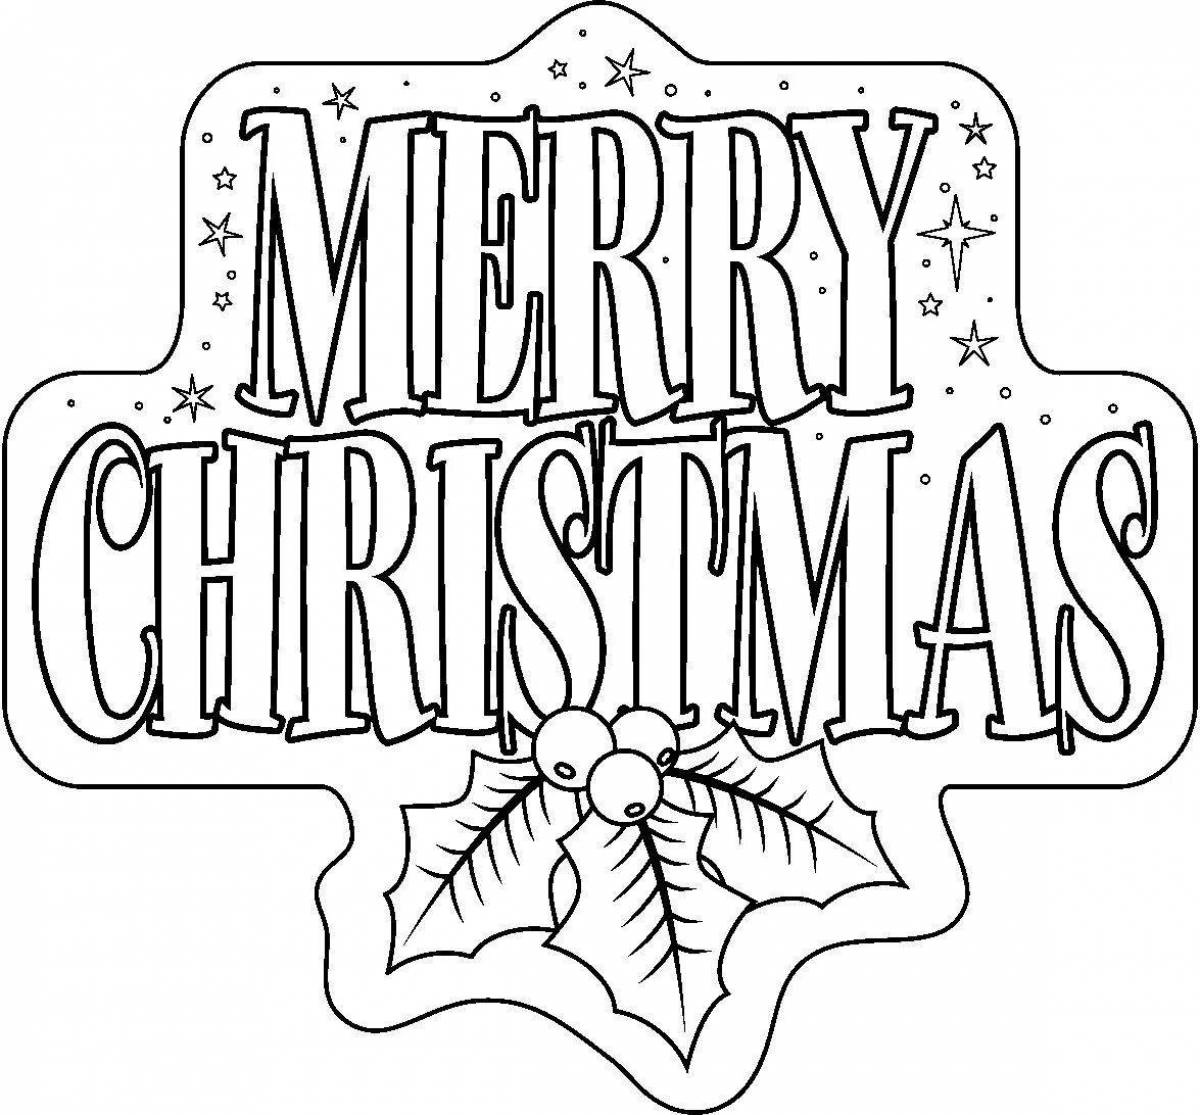 Merry christmas and happy new year coloring book